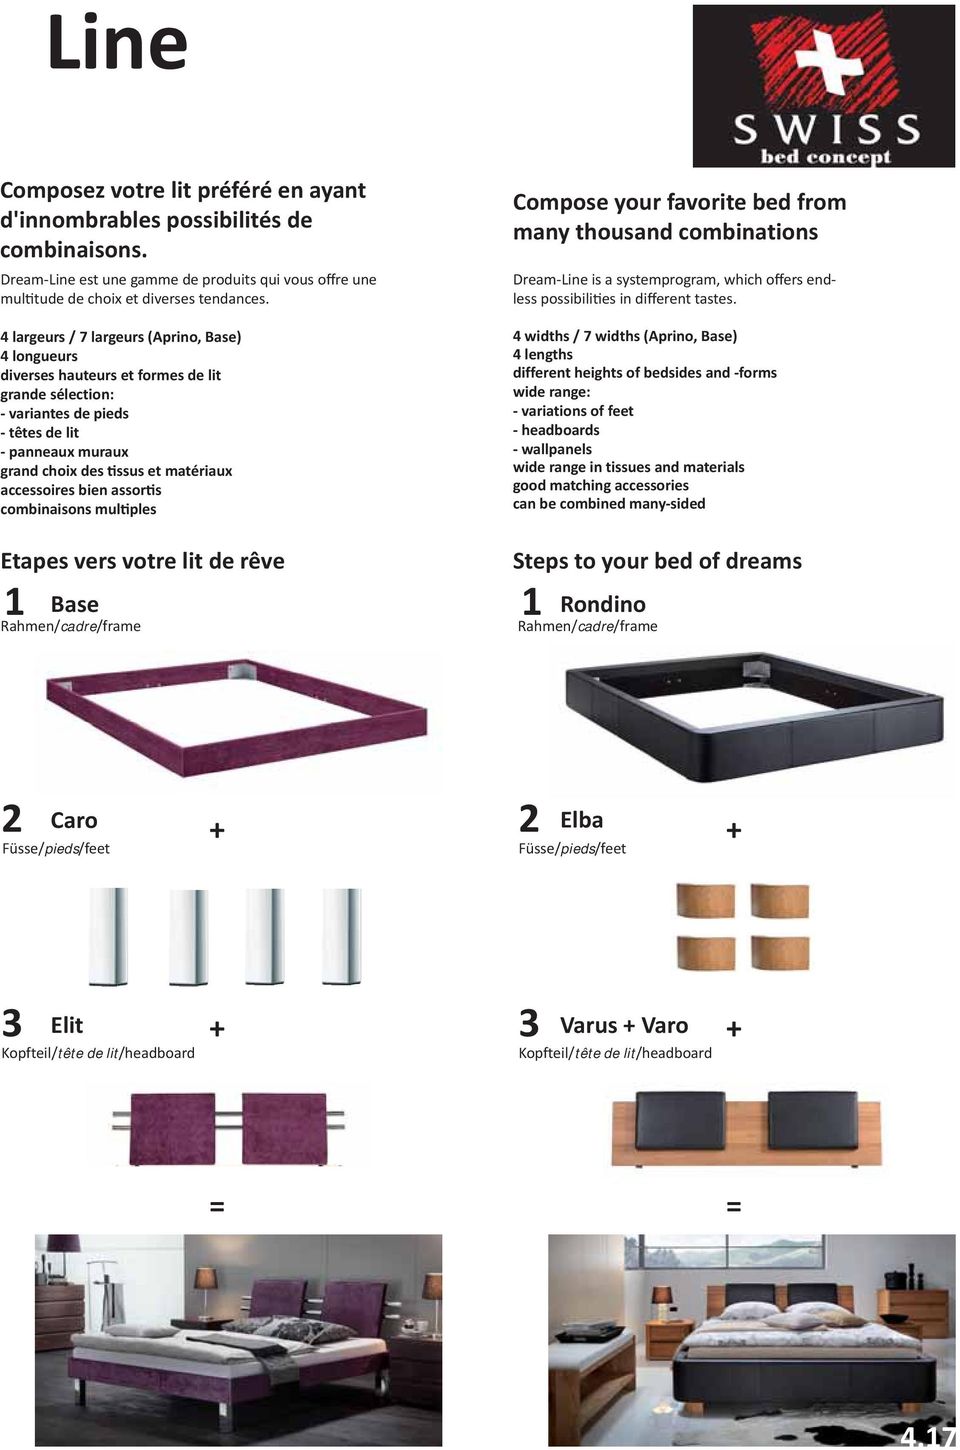 accessoires bien assortis combinaisons multiples Compose your favorite bed from many thousand combinations Dream-Line is a systemprogram, which offers endless possibilities in different tastes.